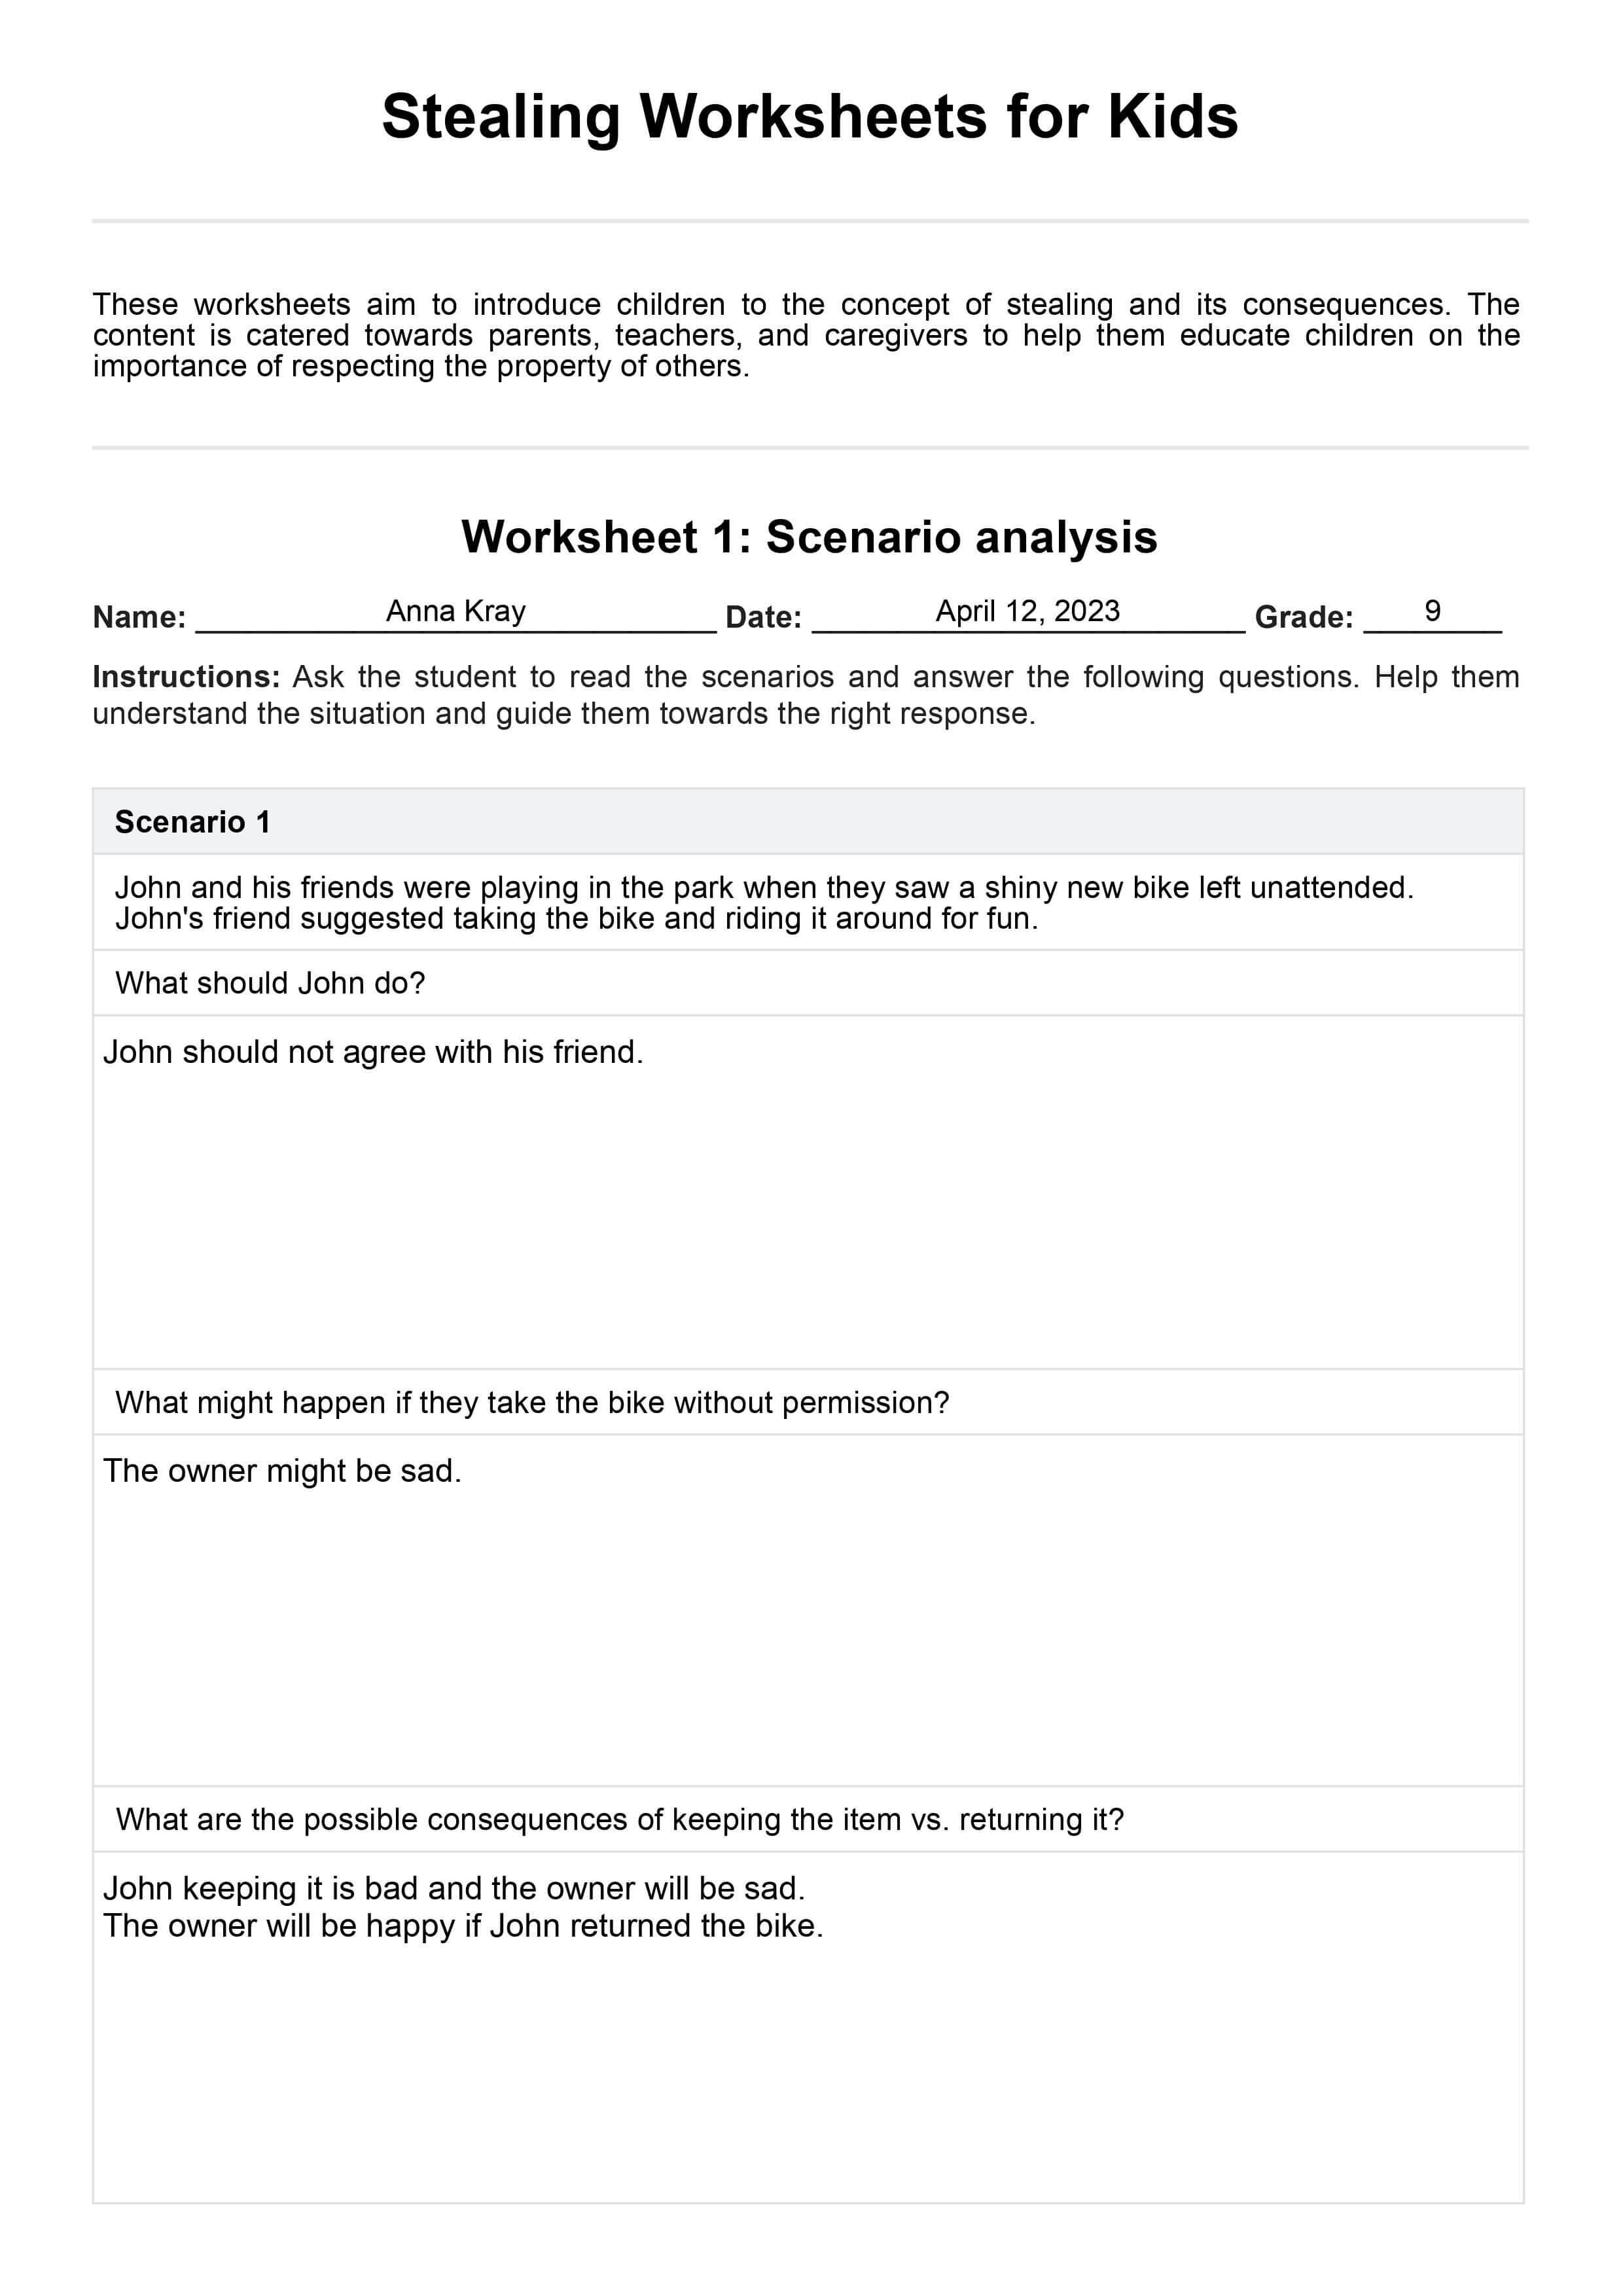 Stealing Worksheets for Kids  PDF Example